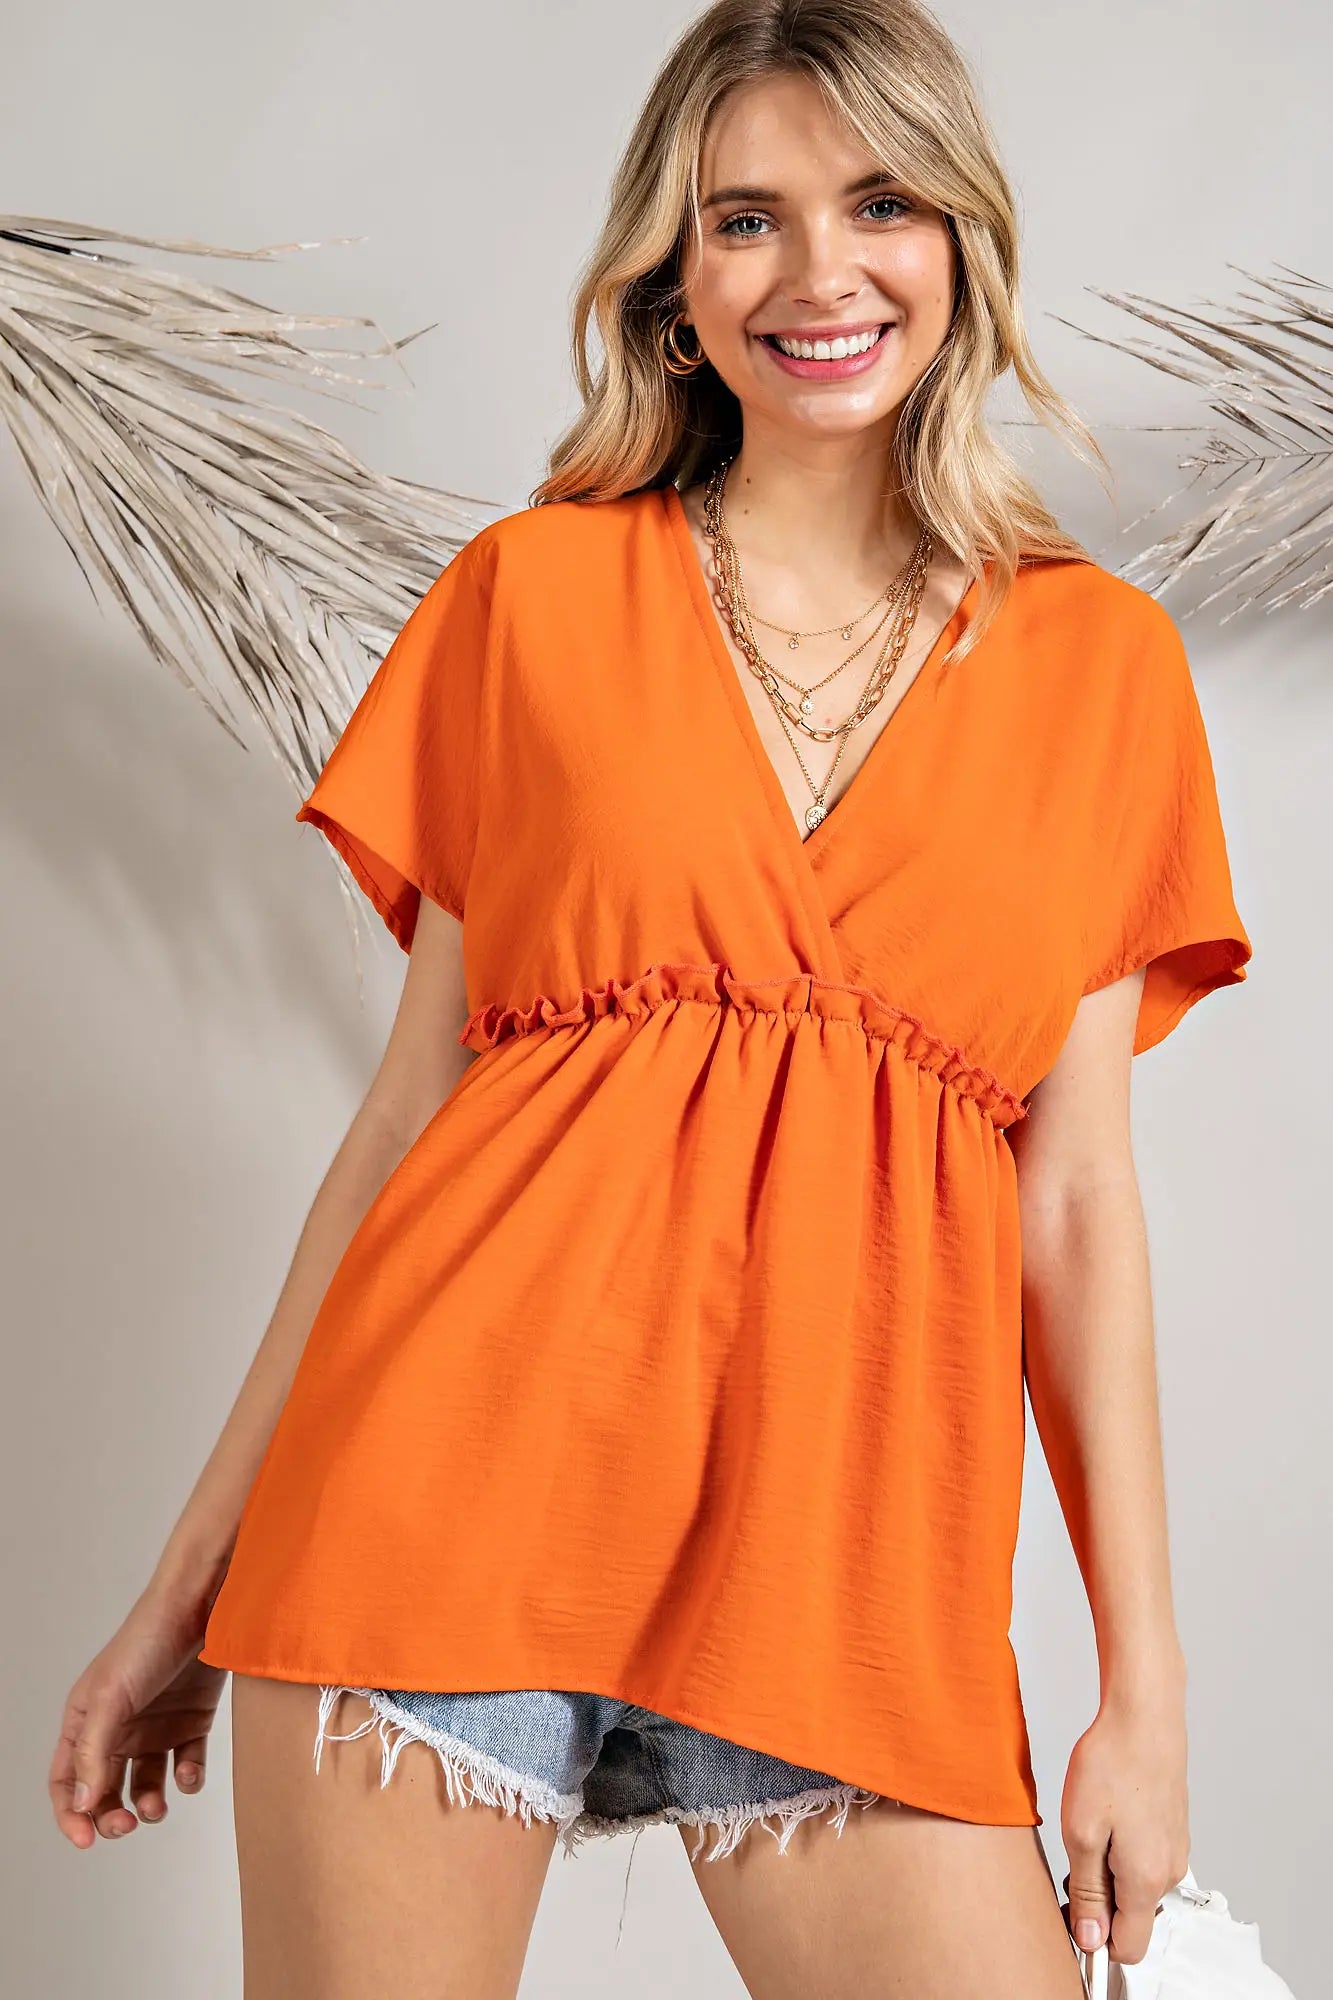 This airy, woven blouse top features a surpliced front with contrasting edge ruffle detail, plus a tiered waist. This modern design will become a wardrobe staple for the San Luis Obispo woman– perfect for everything from days at the office to weekend brunch